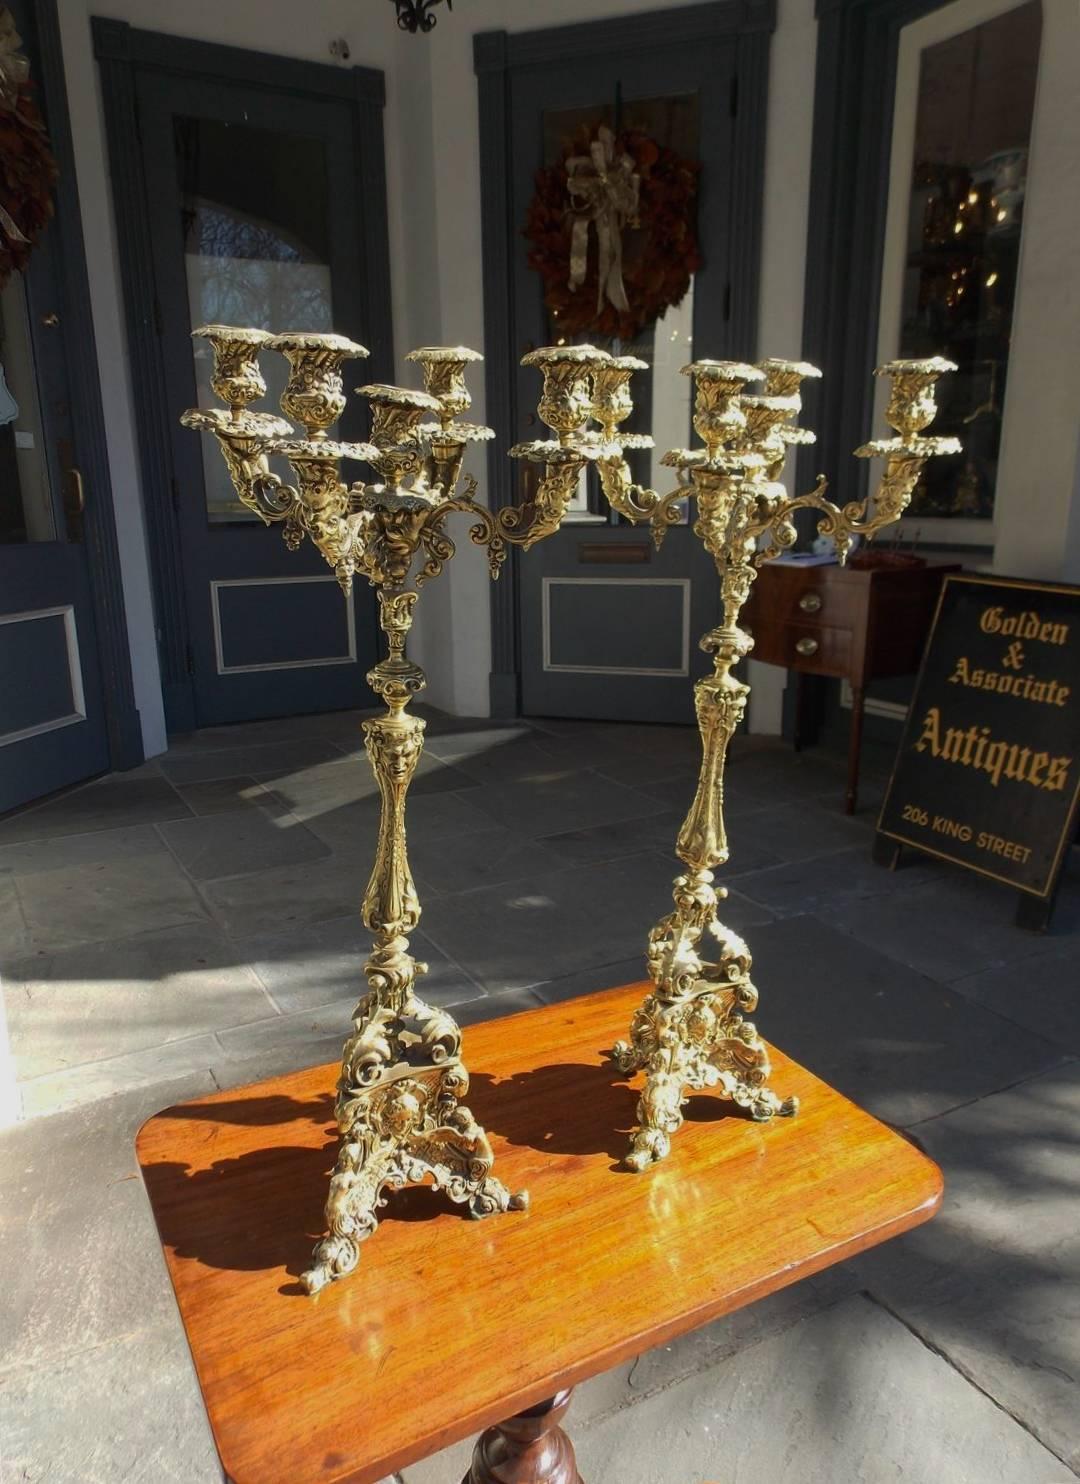 Pair of Italian bronze five-arm figural candelabras with decorative floral motif, flanking rams heads, and terminating on a tripod base with acanthus winged cherub motif. Early 19th century. Candle powered and can be electrified if desired.